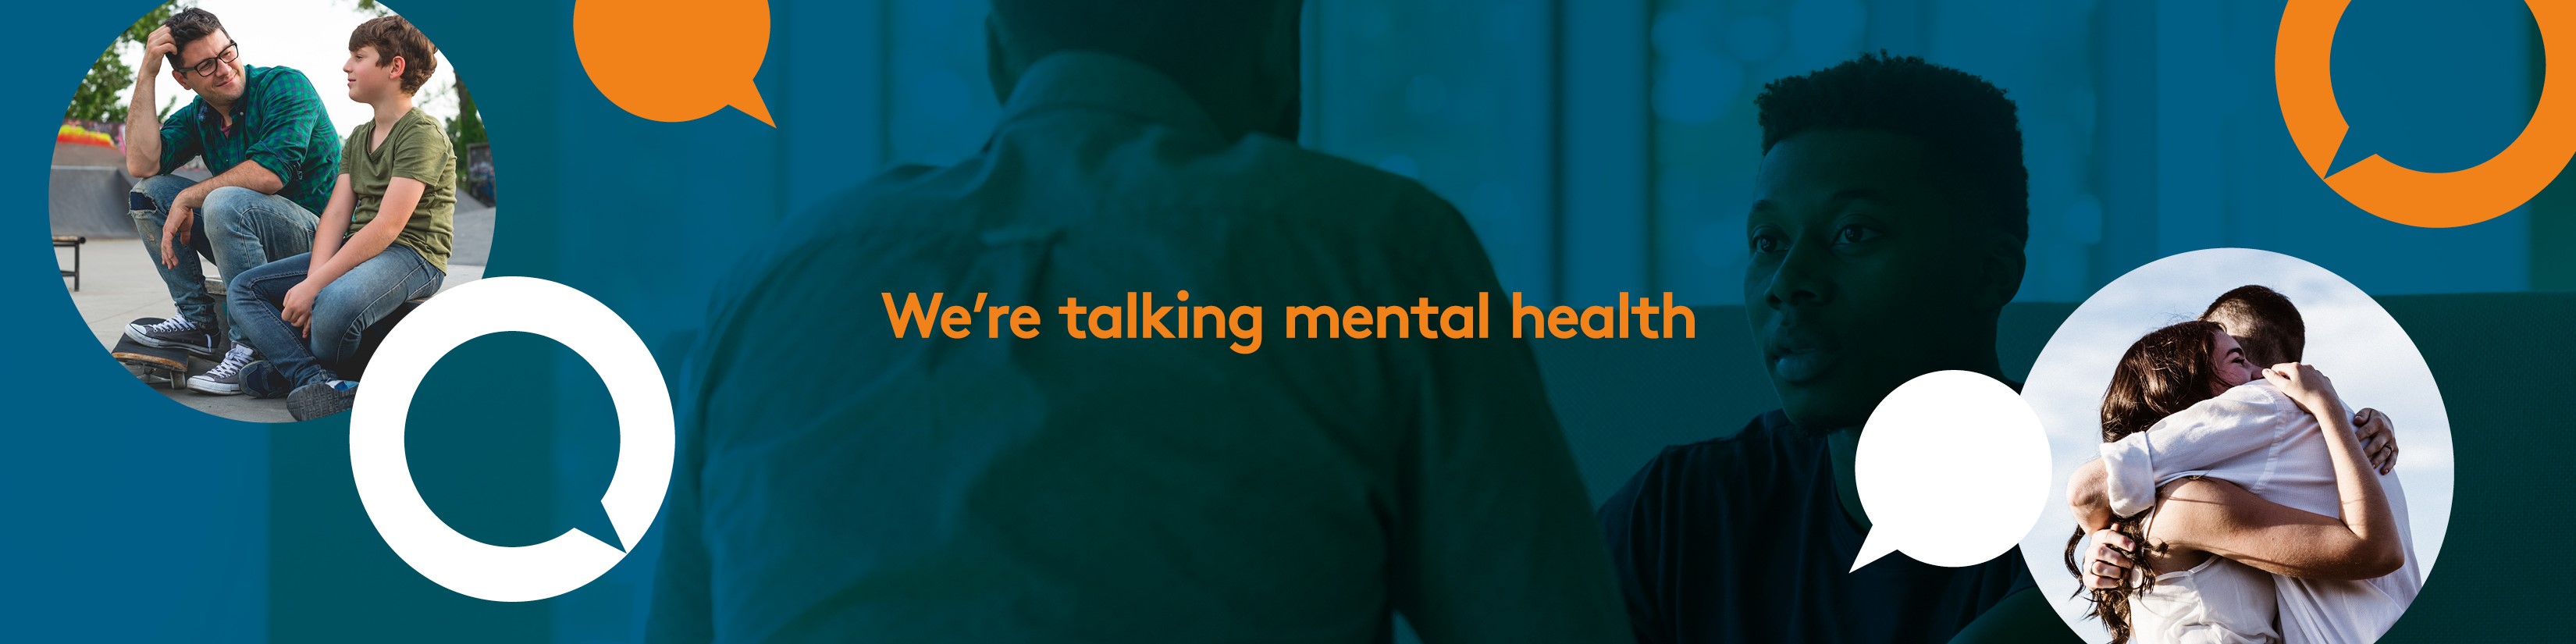 Charlie Waller Trust header with images and text which says 'We're talking mental health'